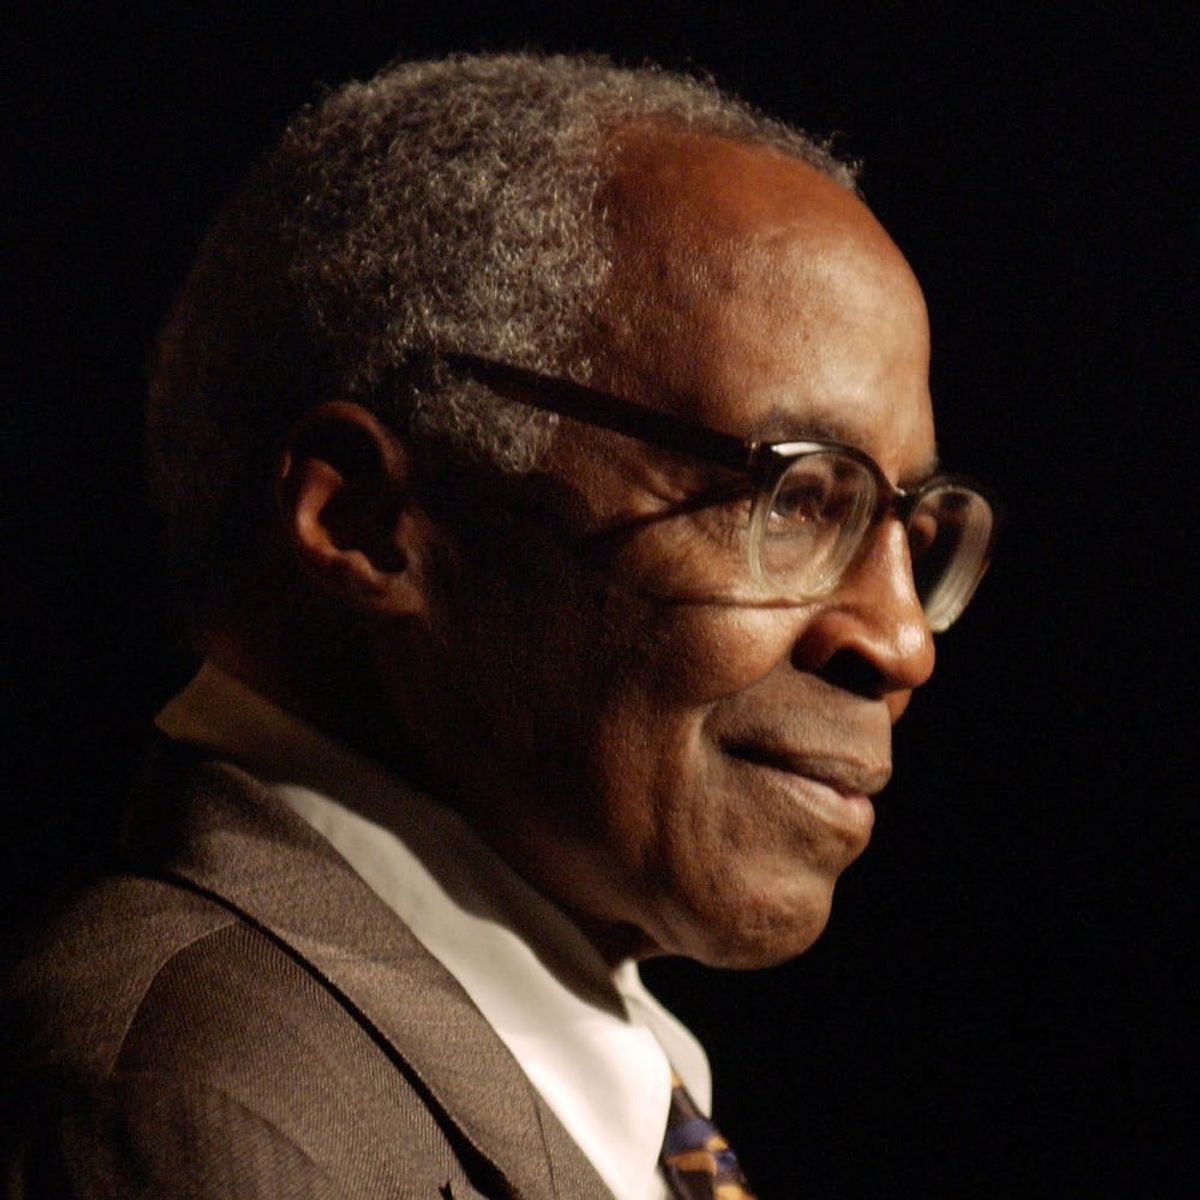 Robert Guillaume, “Benson” Star and Voice of Rafiki in “The Lion King,” Has Died